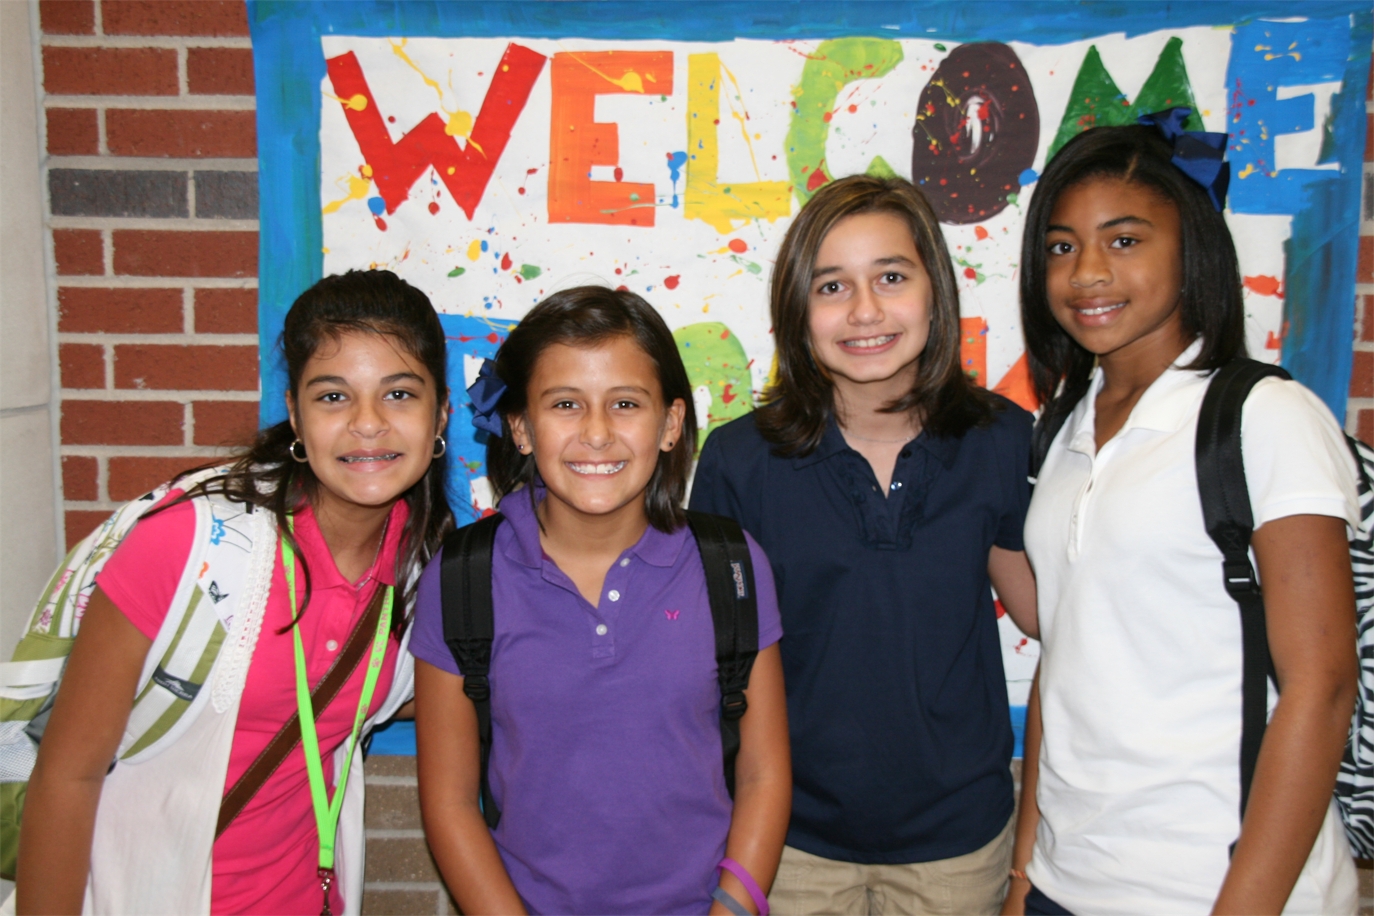 CCISD Welcomes Students Back to School